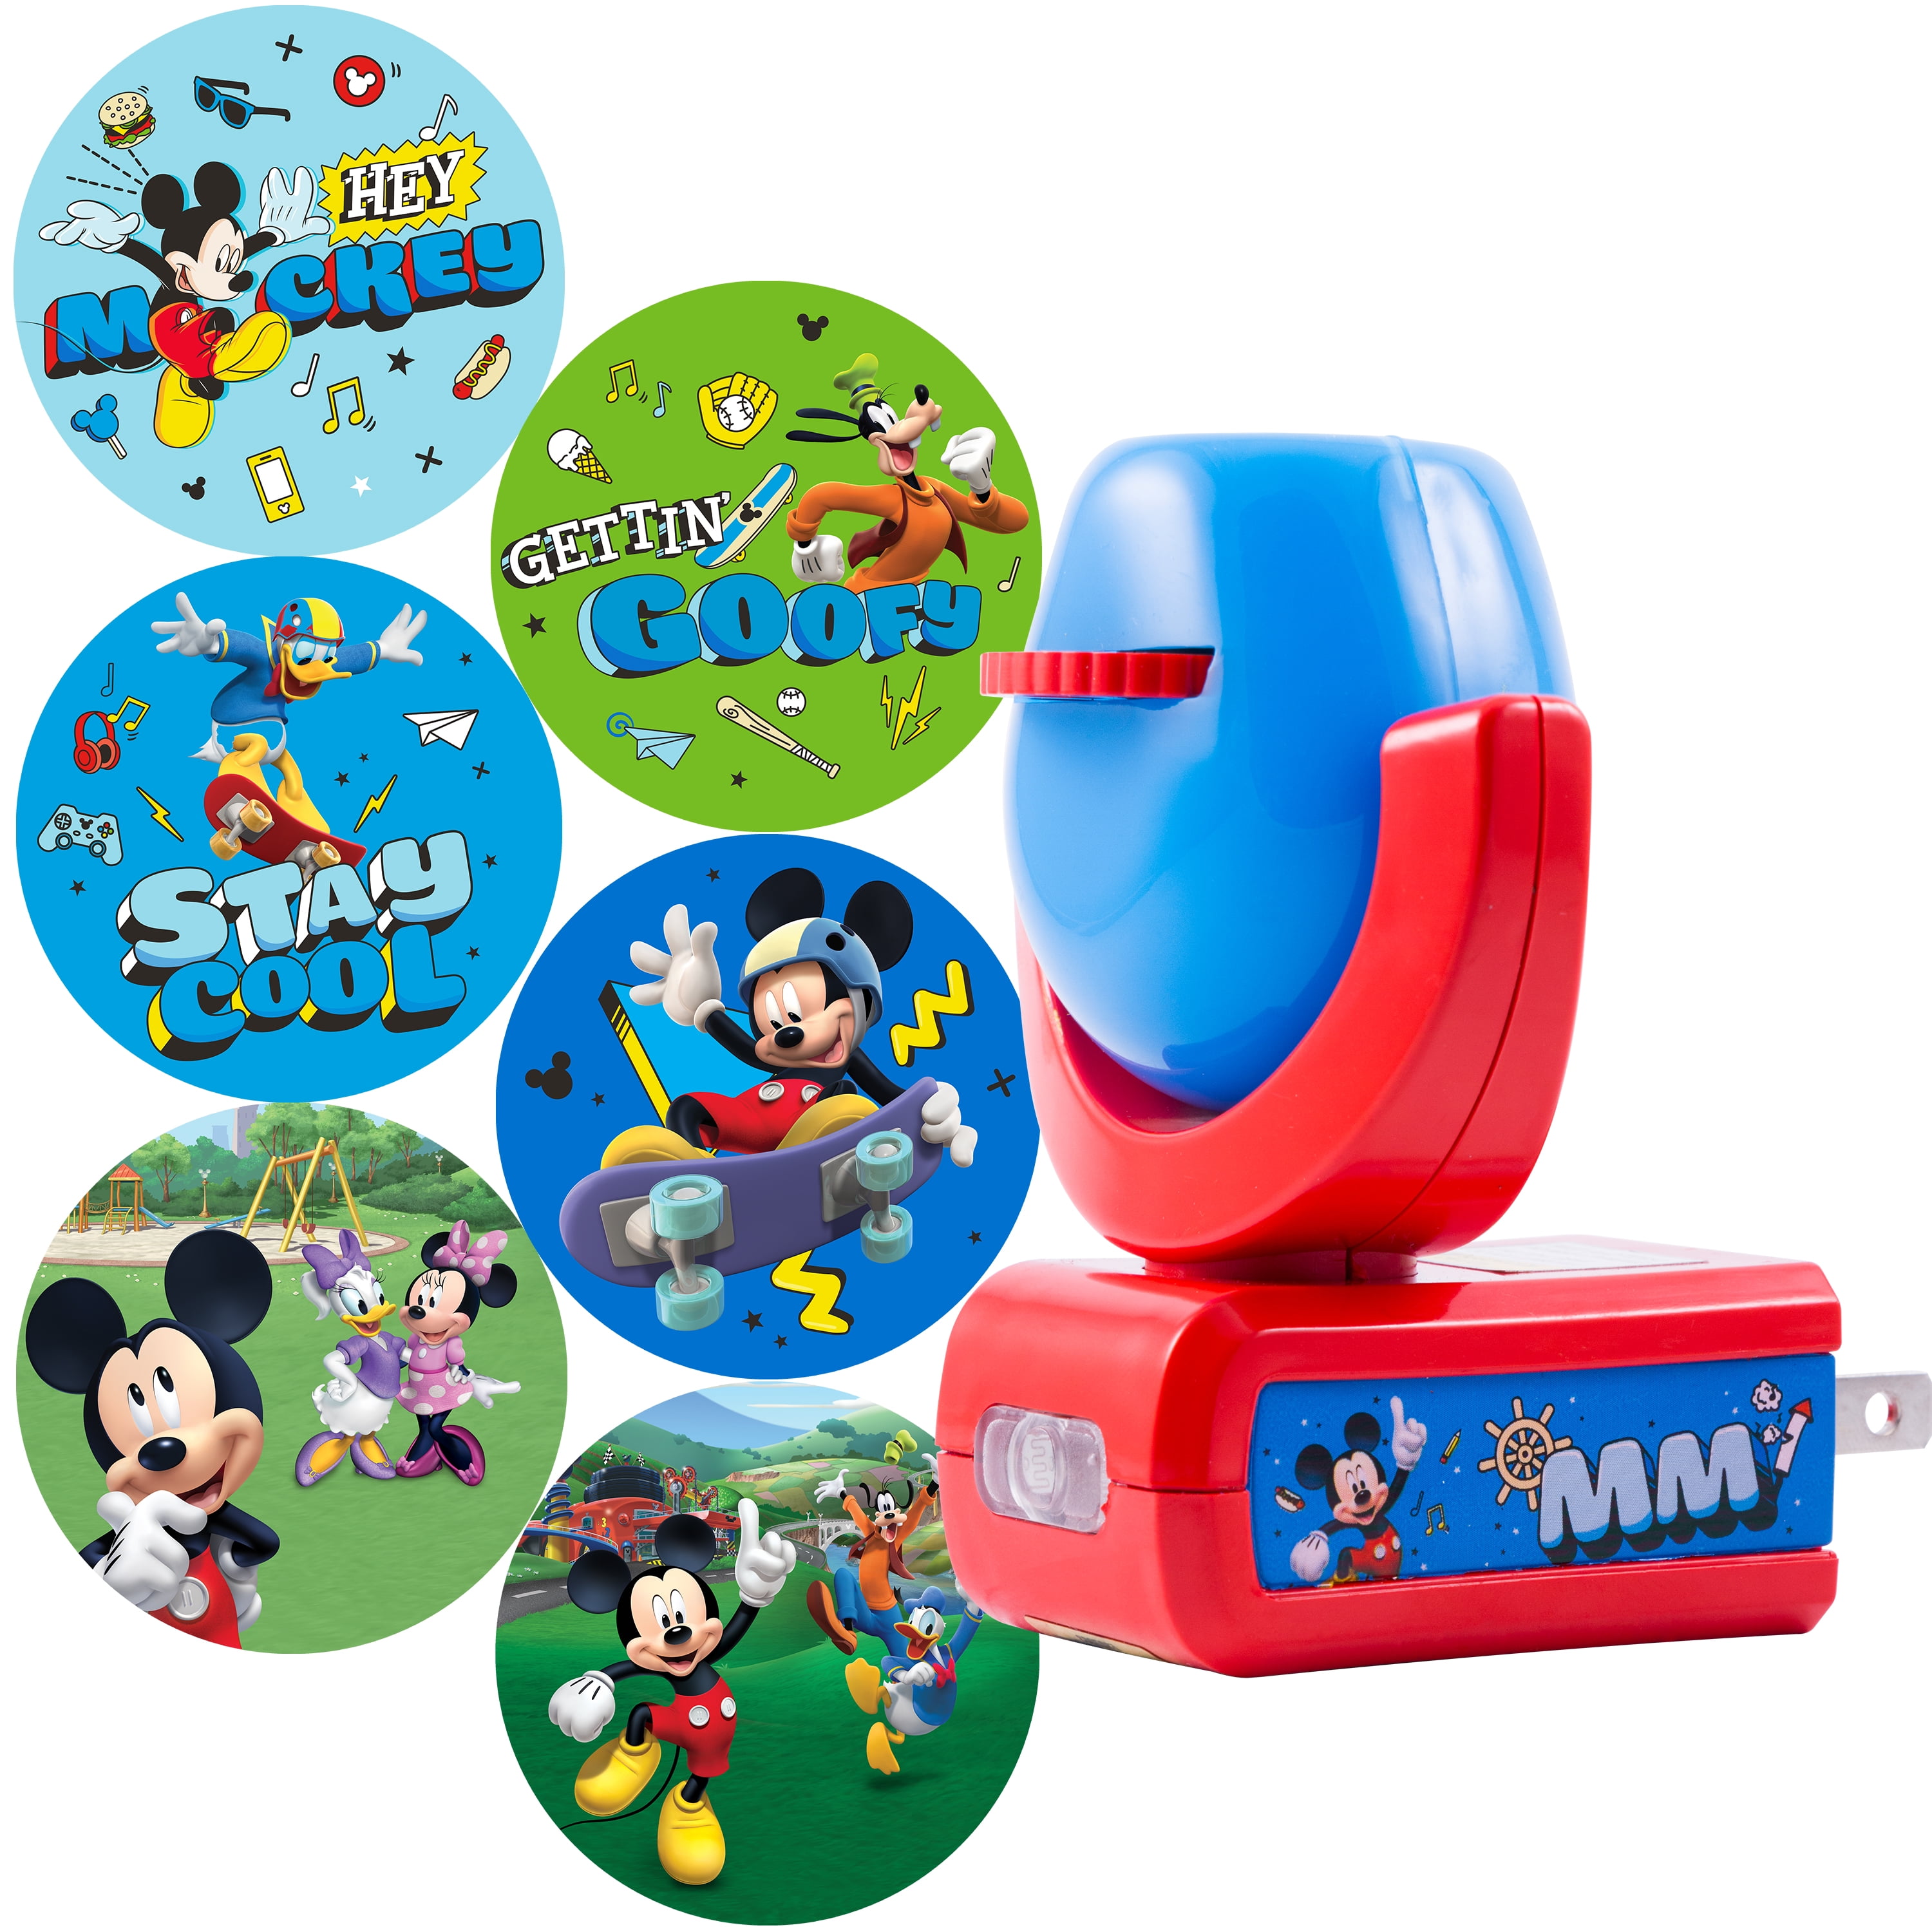 Disney Mickey Mouse Touch LED Night Light with USB Charging Station- Mickey  LED Nightlight with 6 Light Settings, USB 2.0 and USB Type C Ports- Mickey